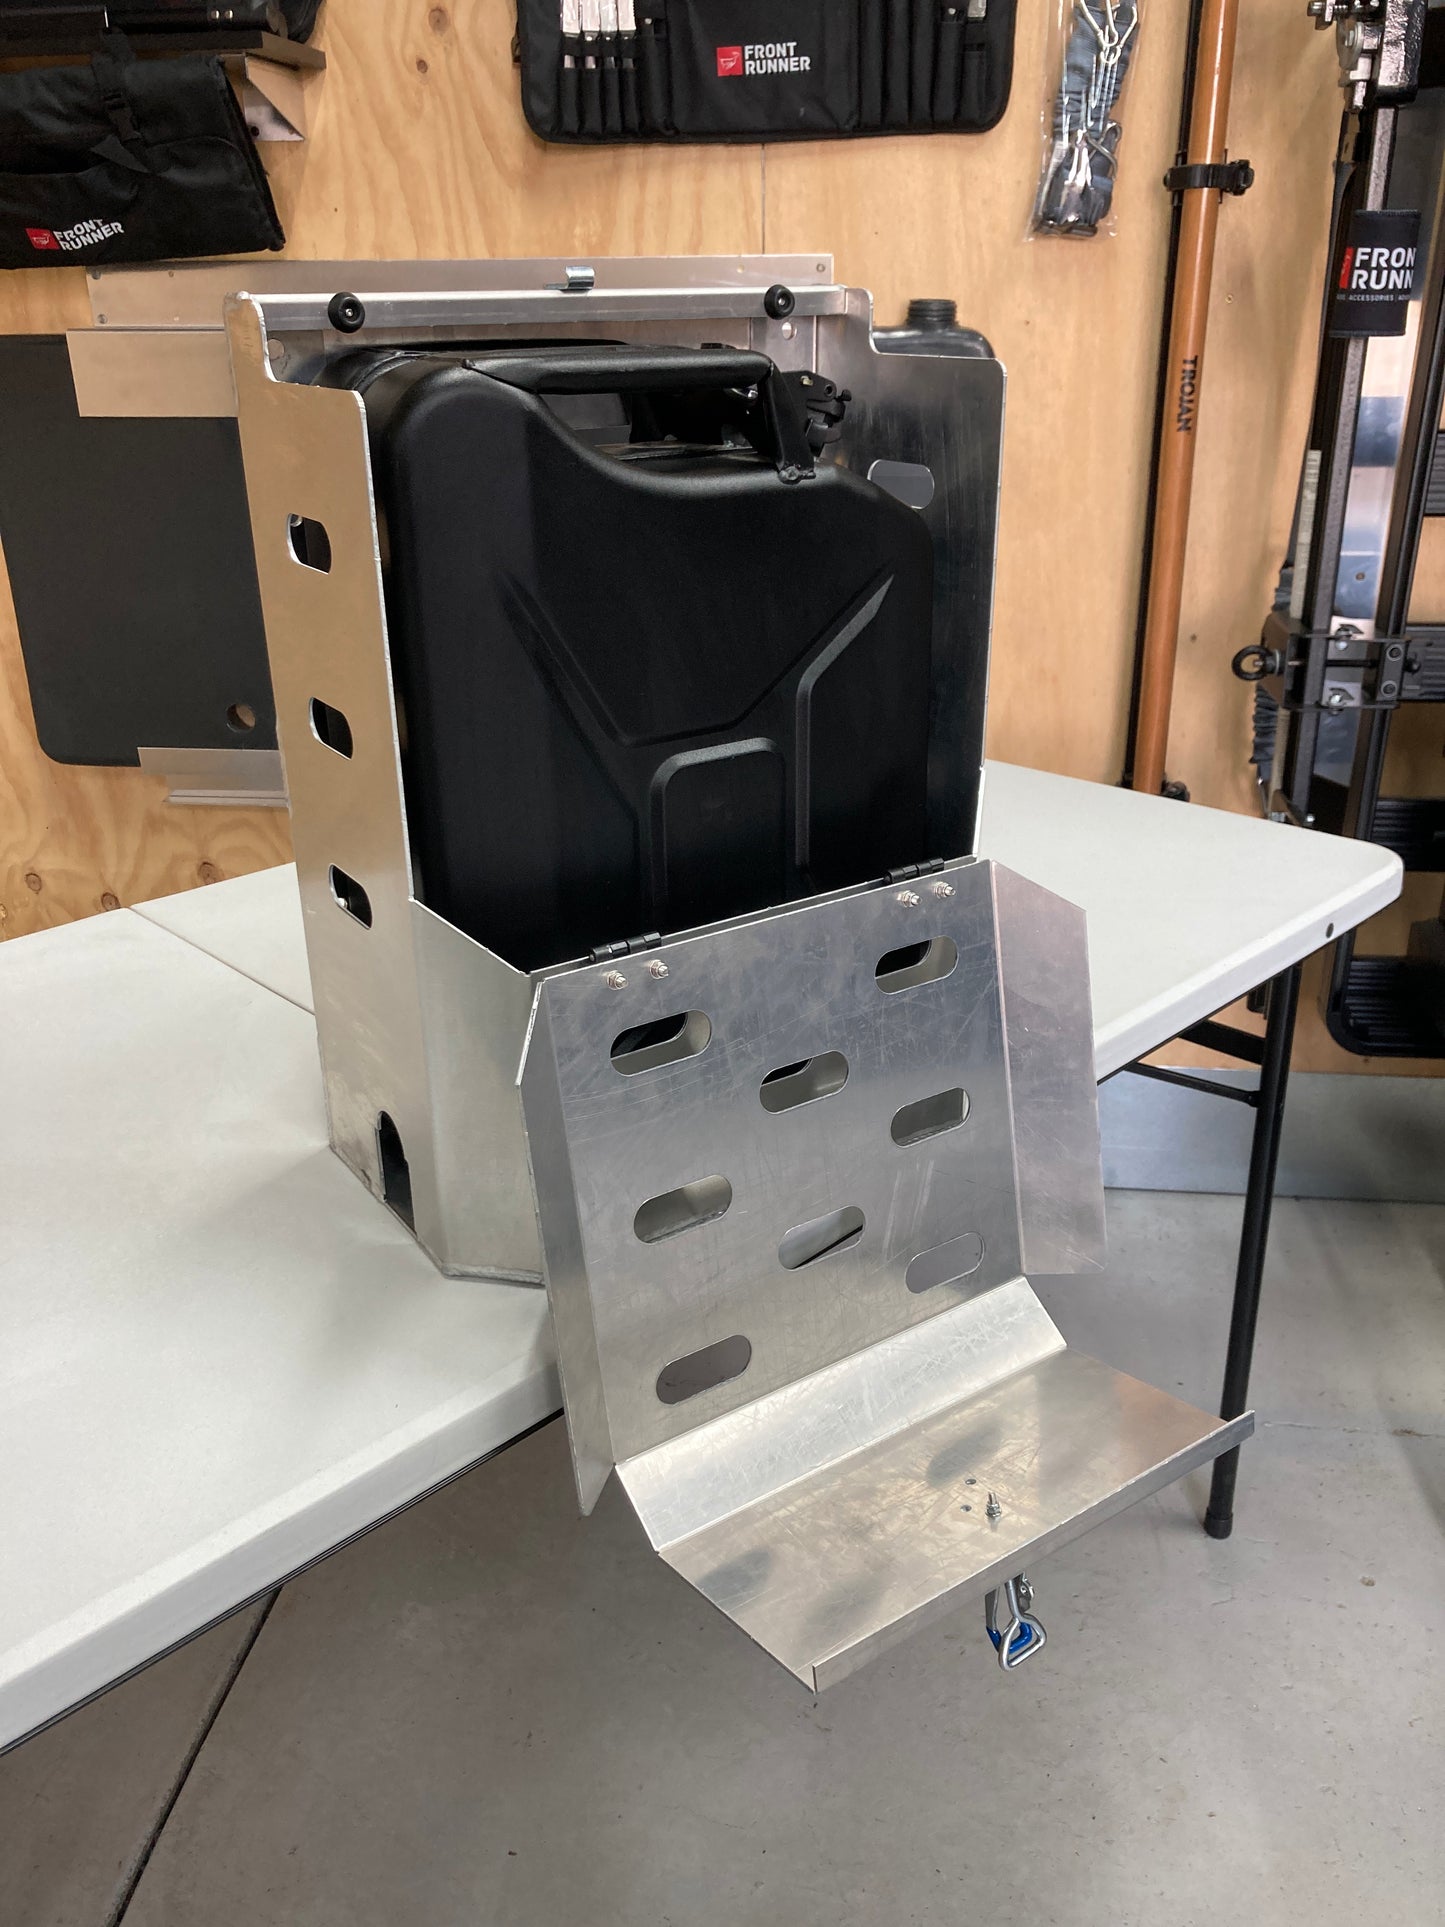 20L Jerry Can Holder